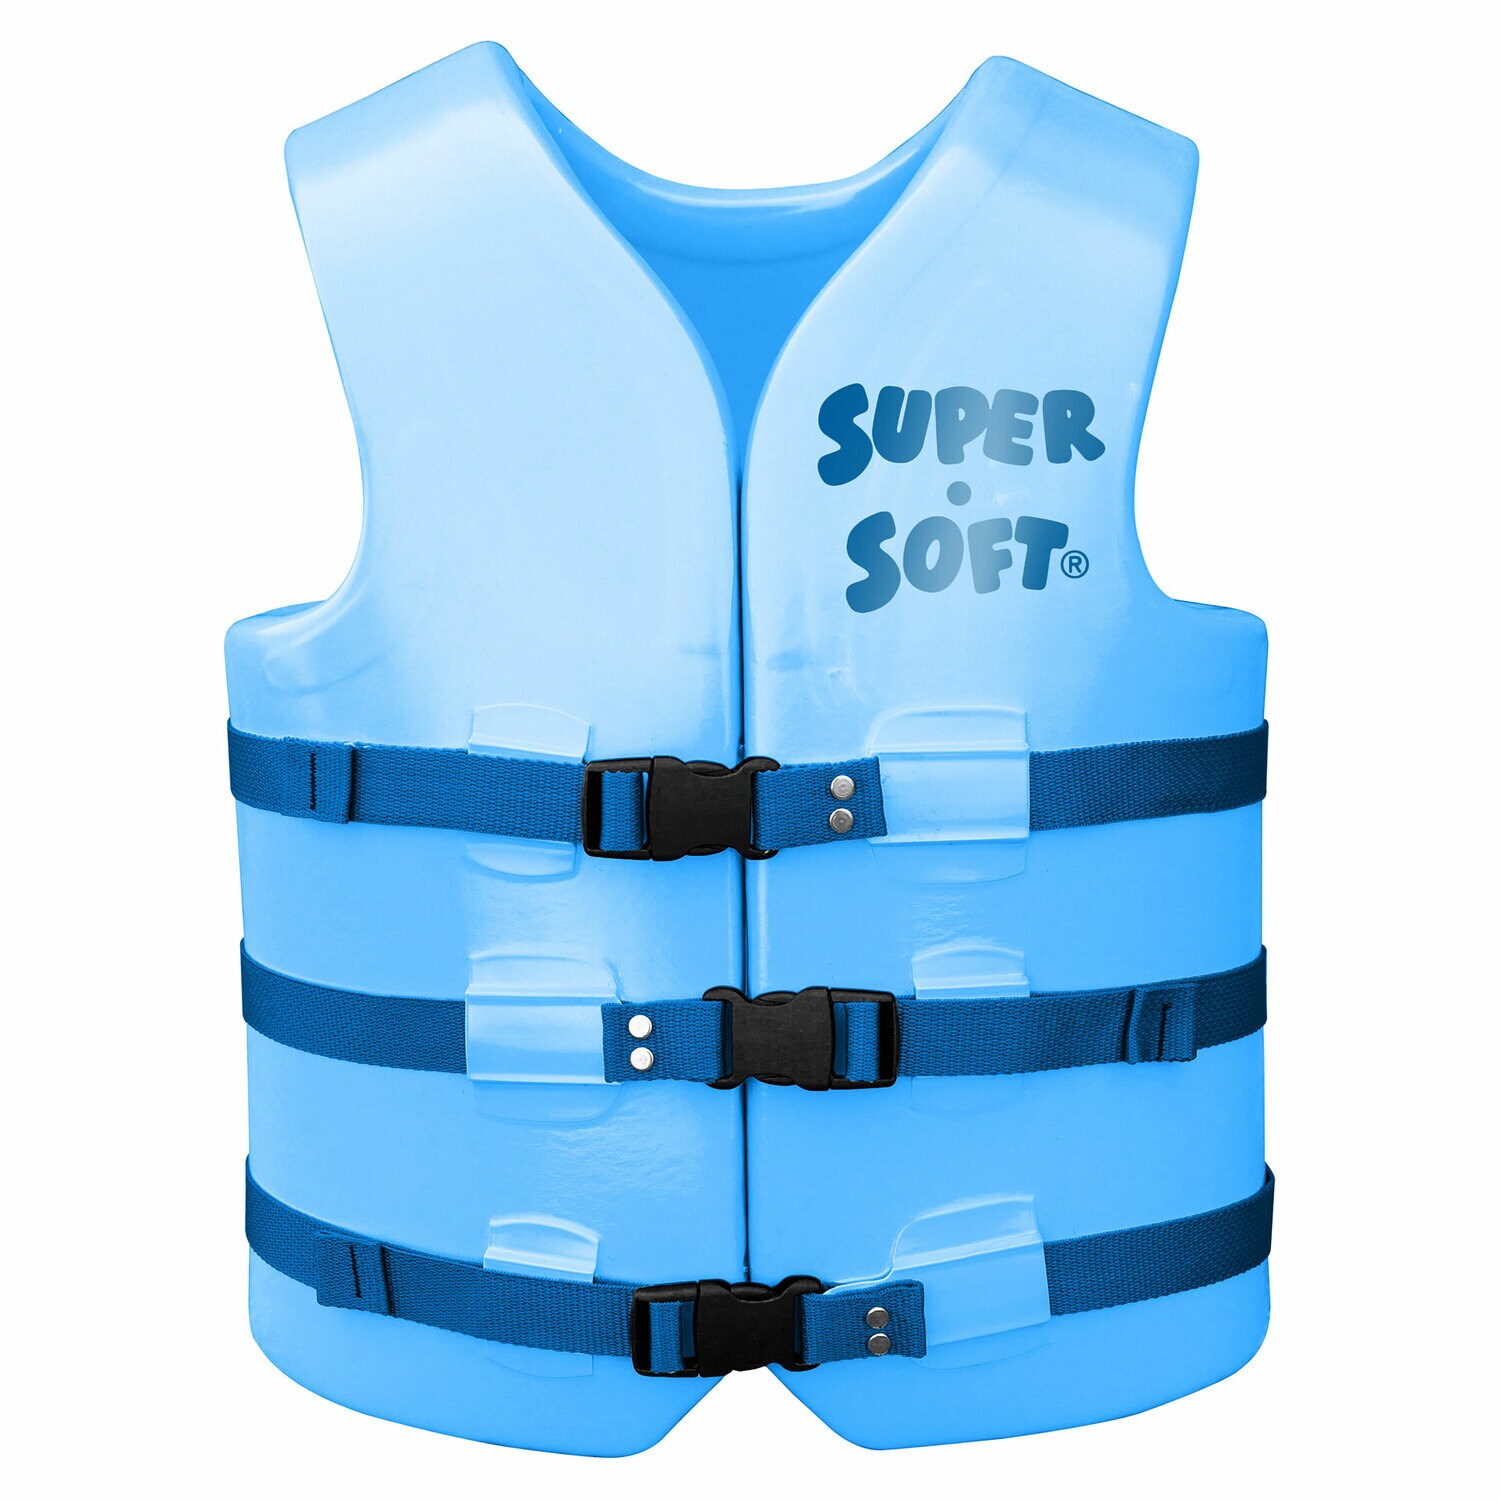 Outdoor Personal Flotation Device, Buoyancy Portable Fishing Vest